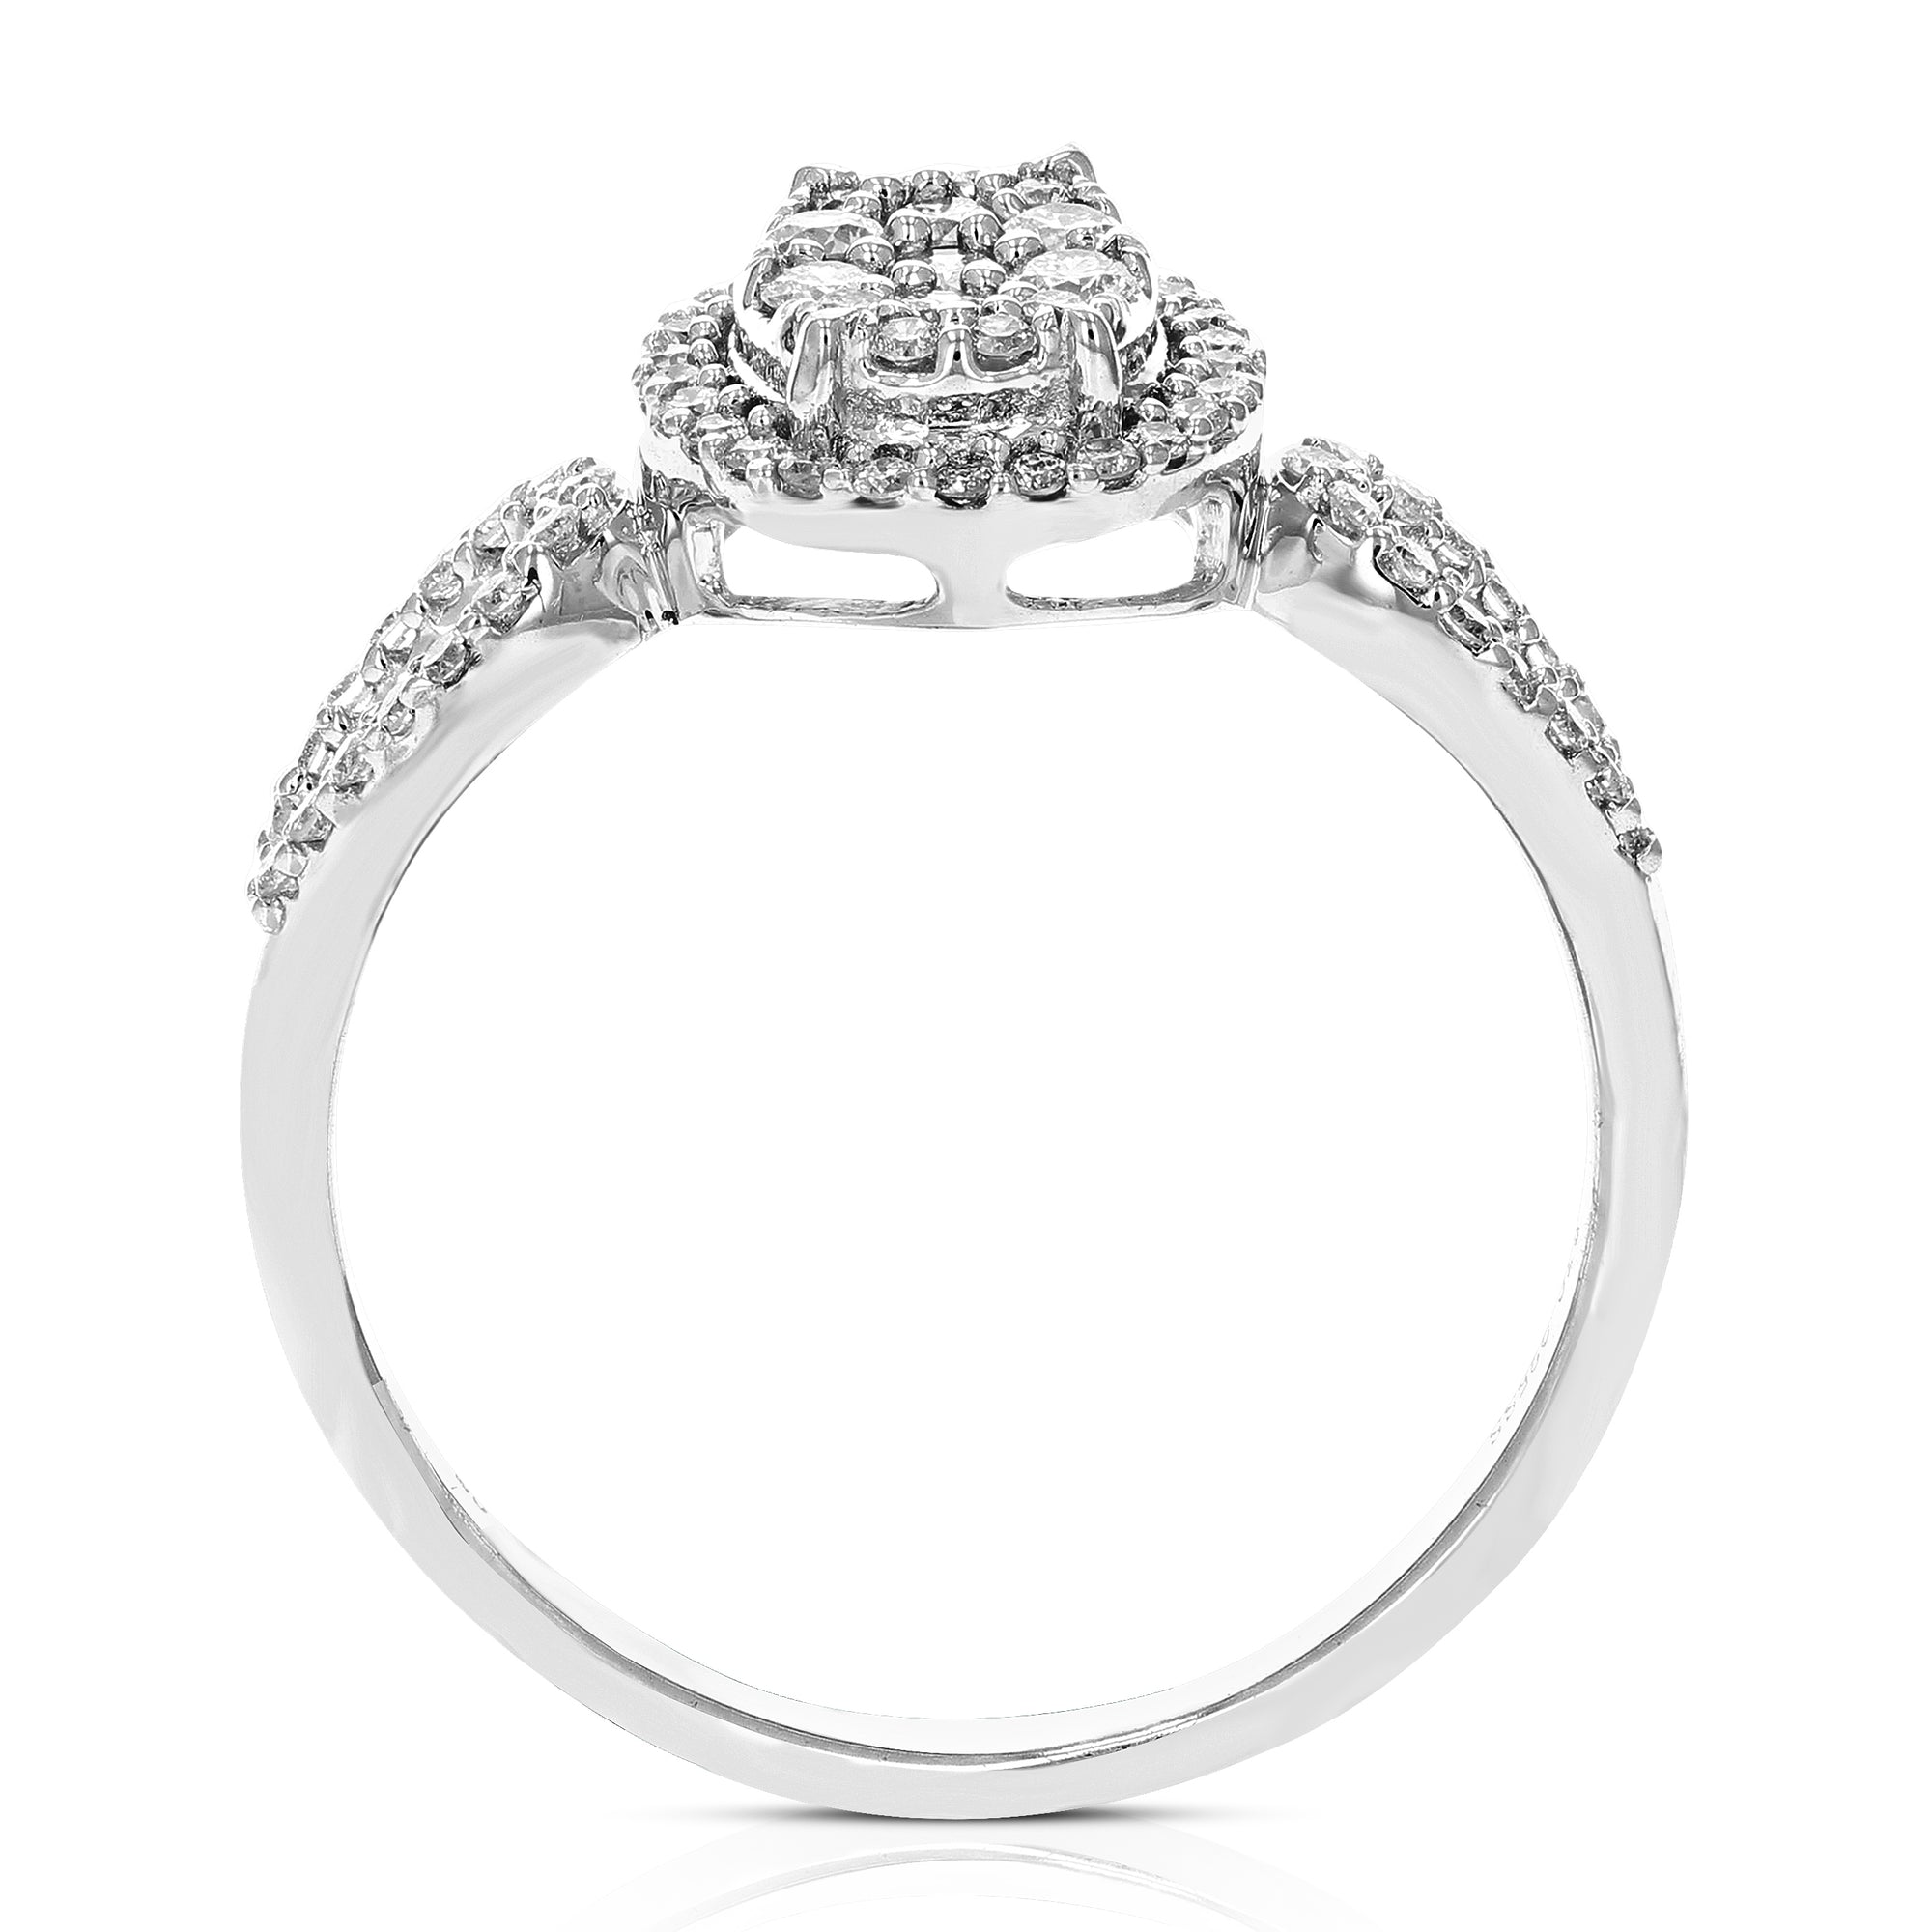 1/2 cttw Diamond Engagement Ring for Women, Round Lab Grown Diamond Ring in 0.925 Sterling Silver, Prong Setting, Size 6-8